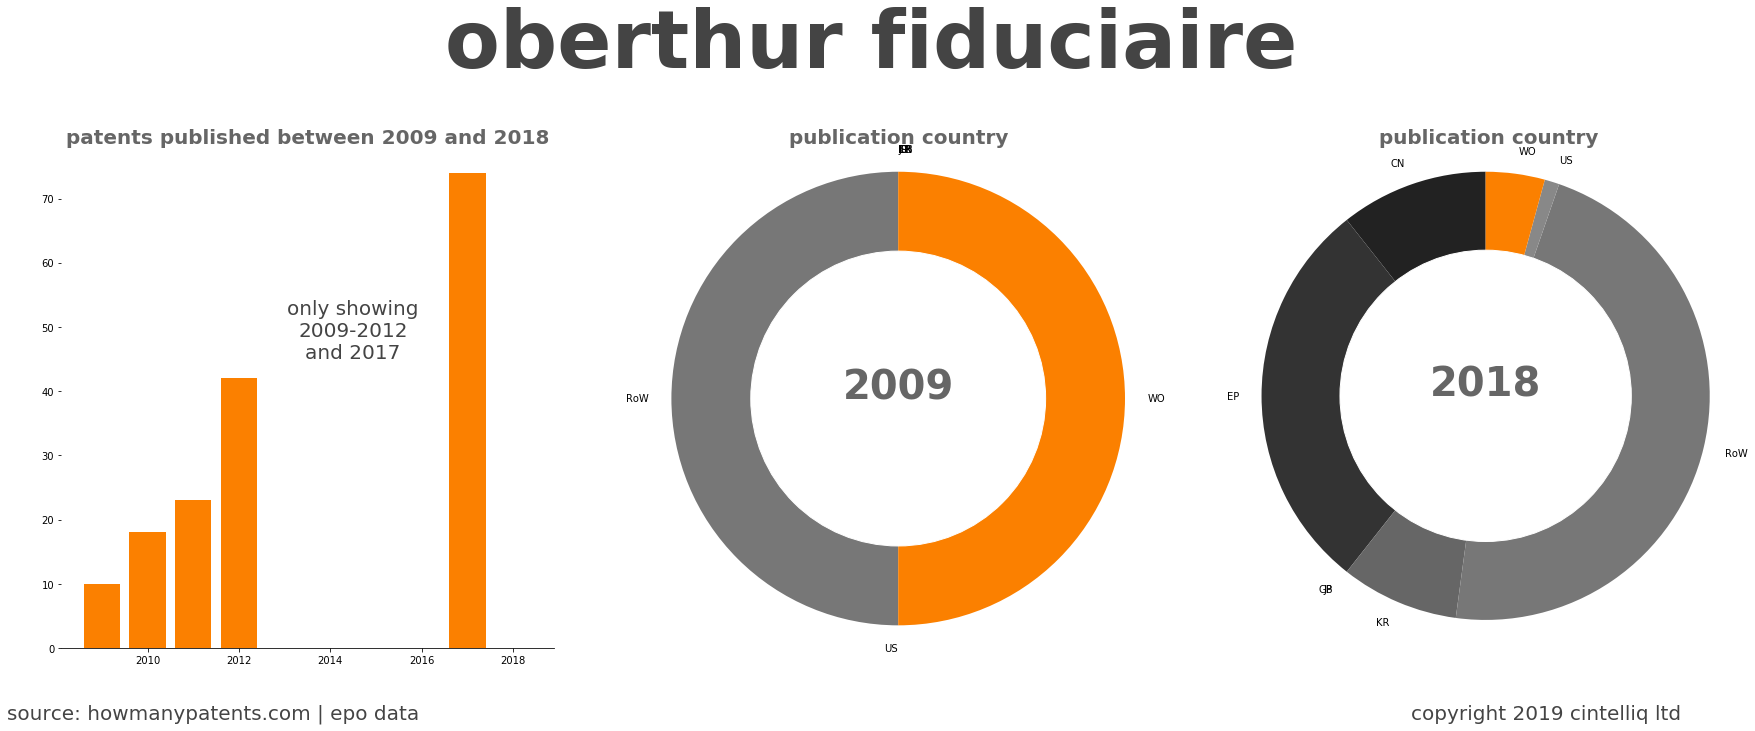 summary of patents for Oberthur Fiduciaire